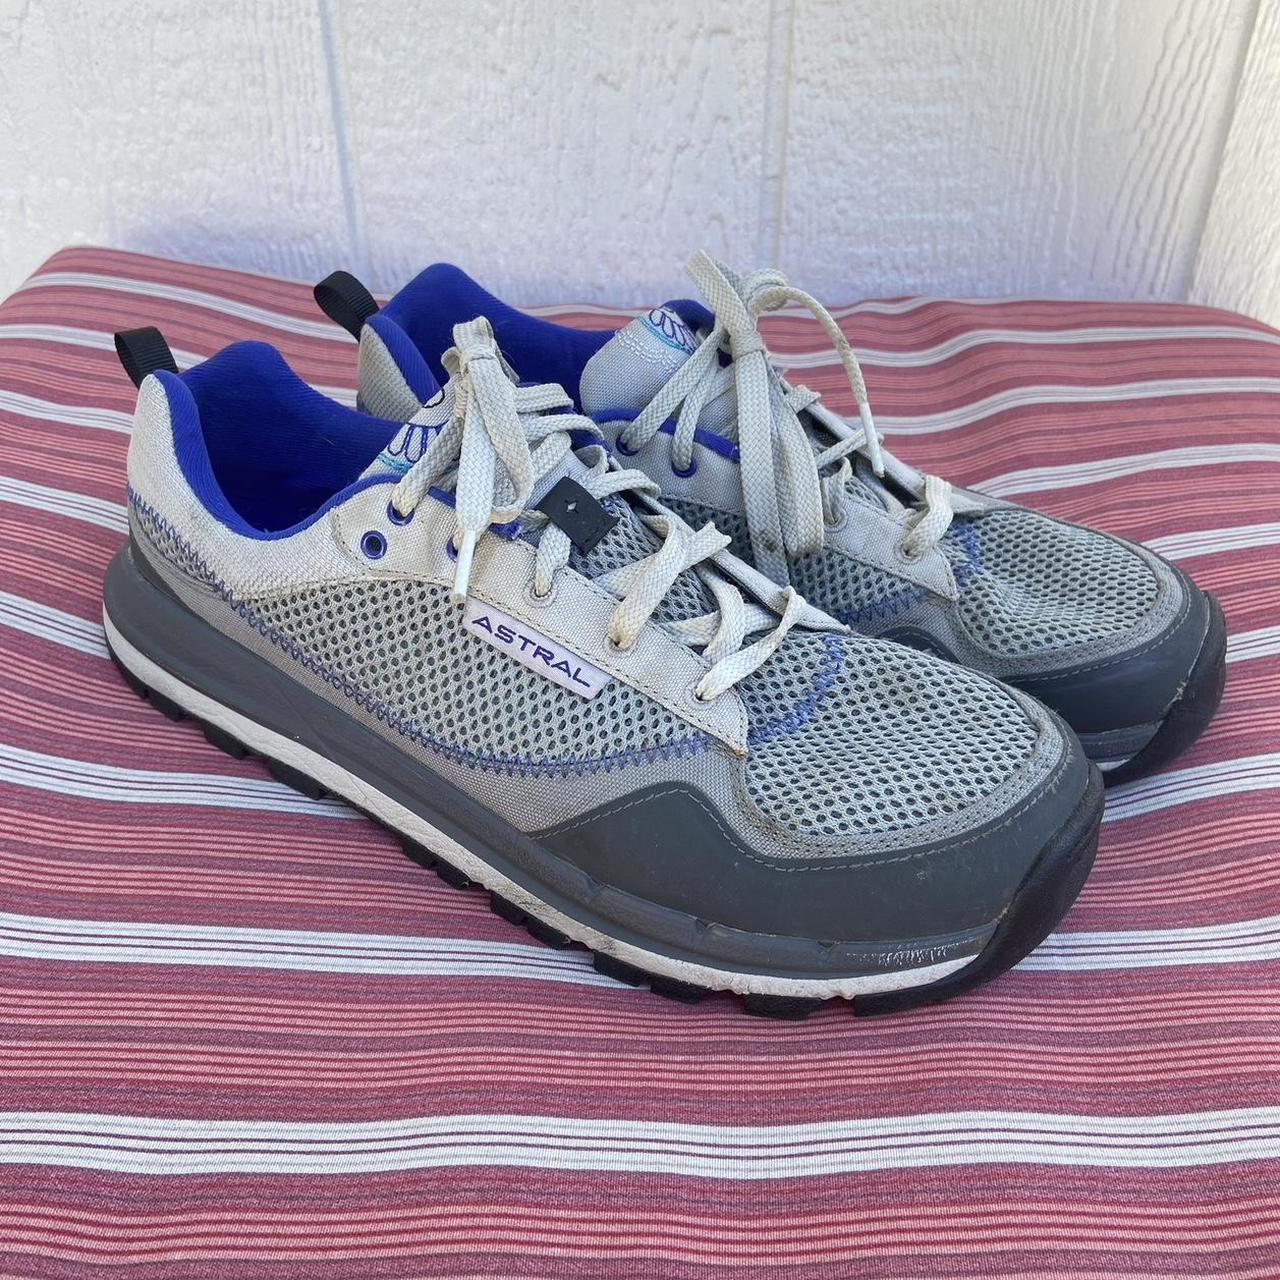 Astral Women's Grey and Navy Trainers